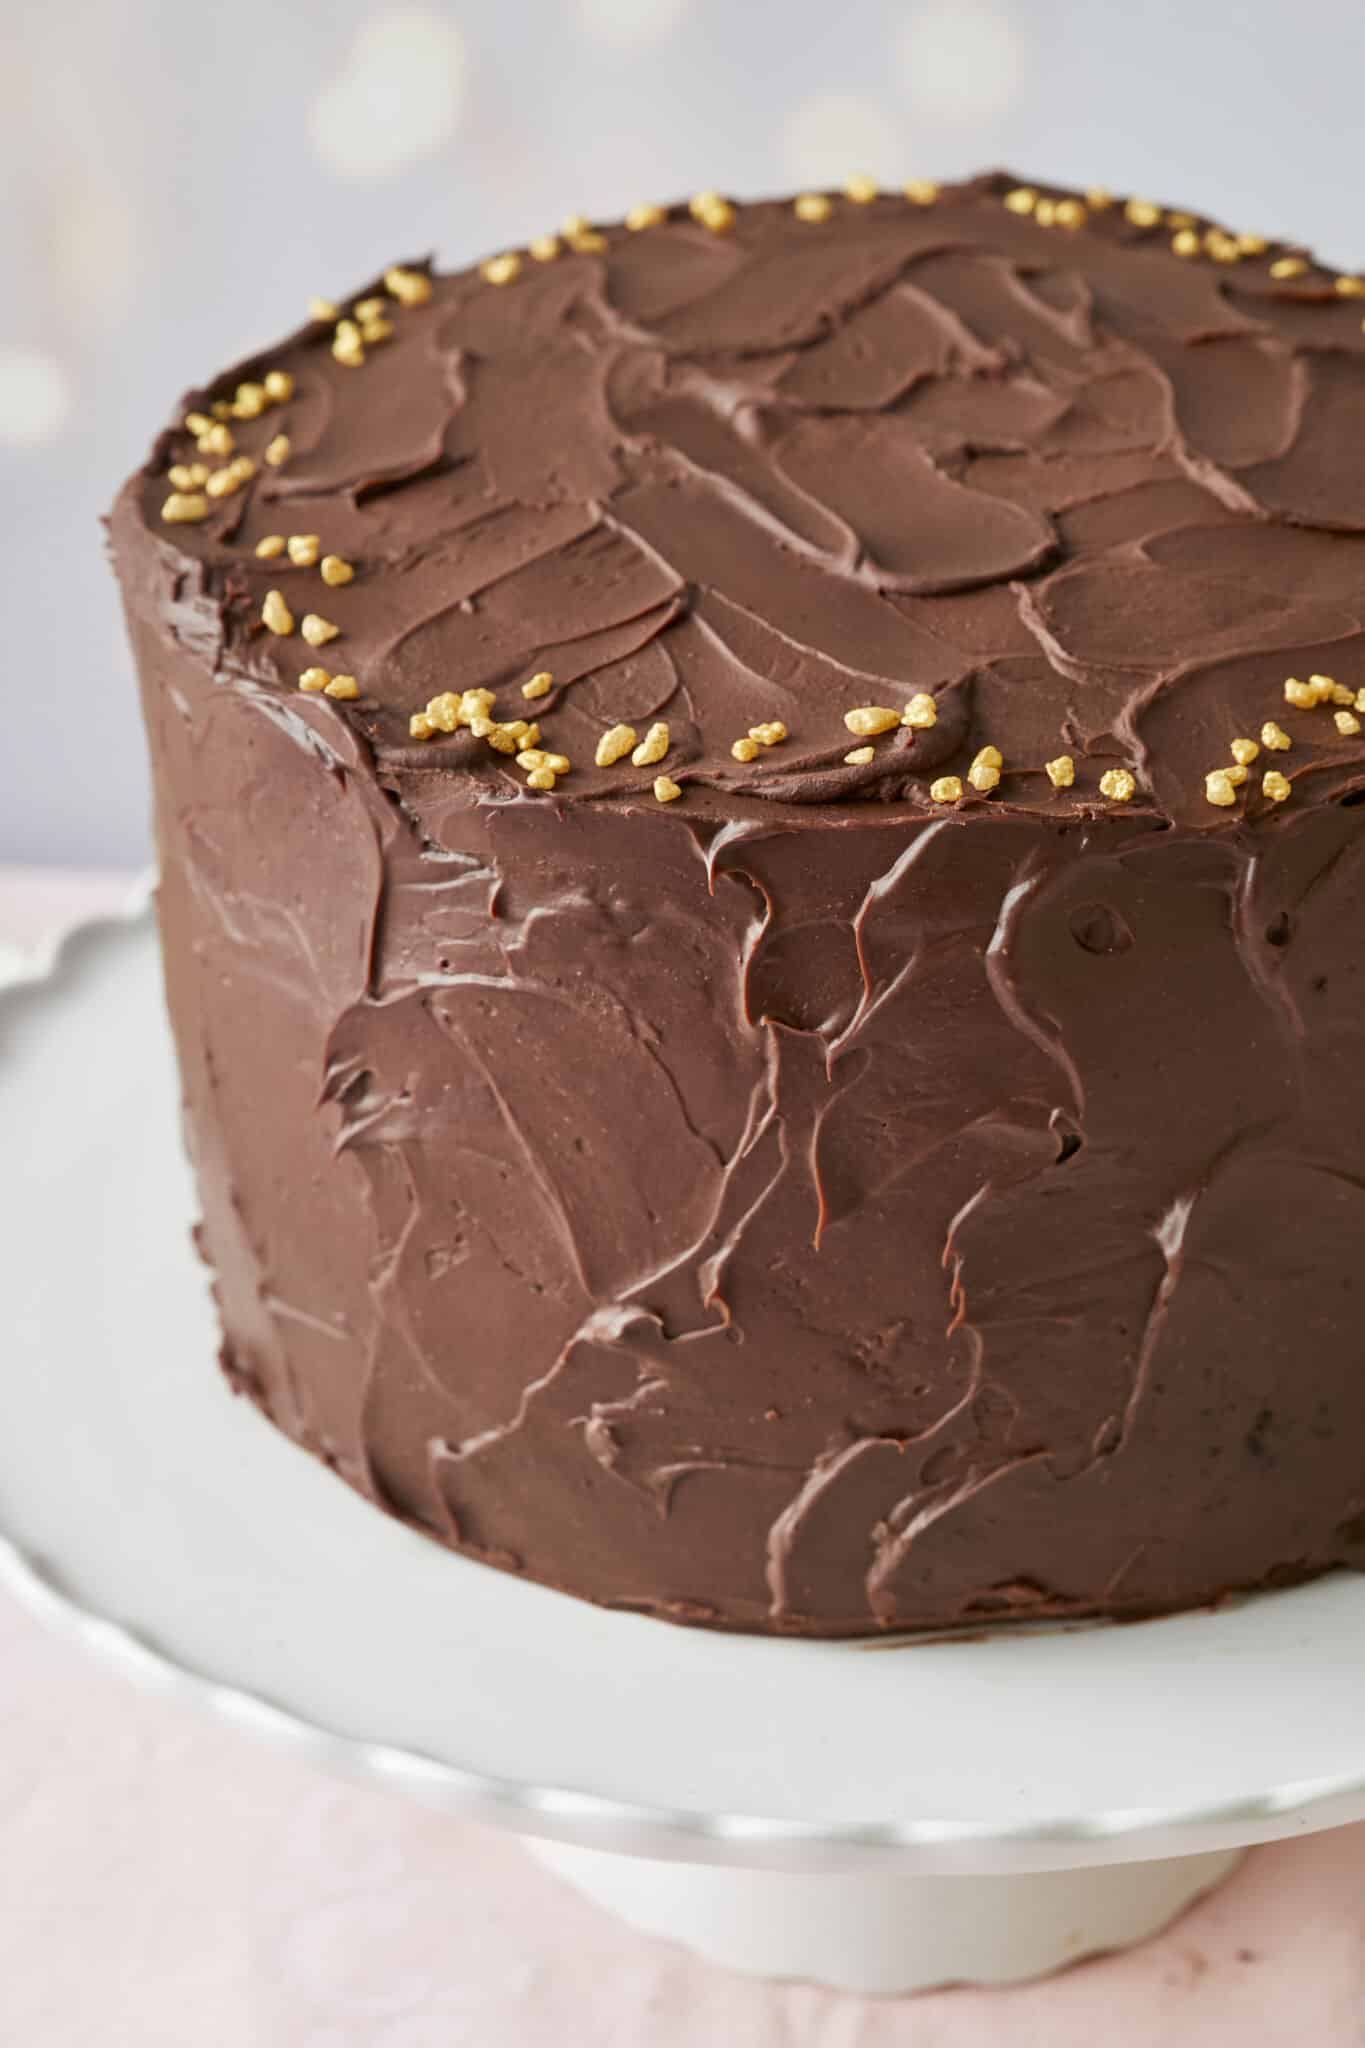 The Luxury 24-Layer Chocolate Cake is covered with silky smooth decadent ganache, creating the visually-impressive and sumptuous dessert of your dreams.